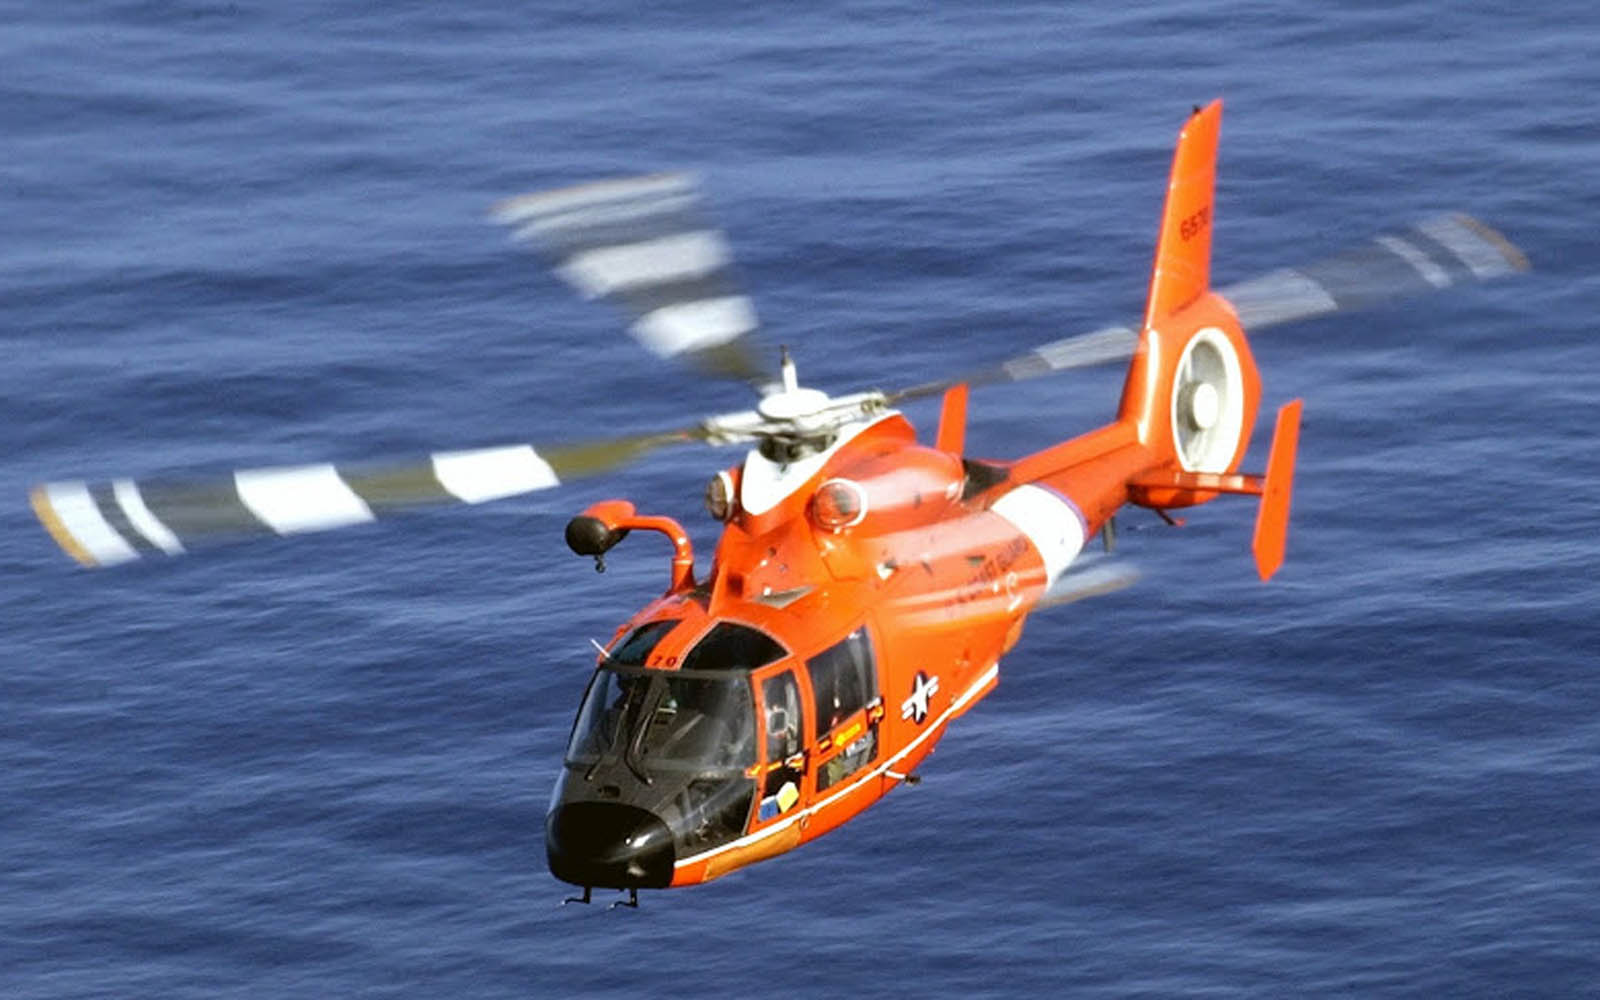 Wallpaper Hh Dolphin Us Coast Guard Helicopter